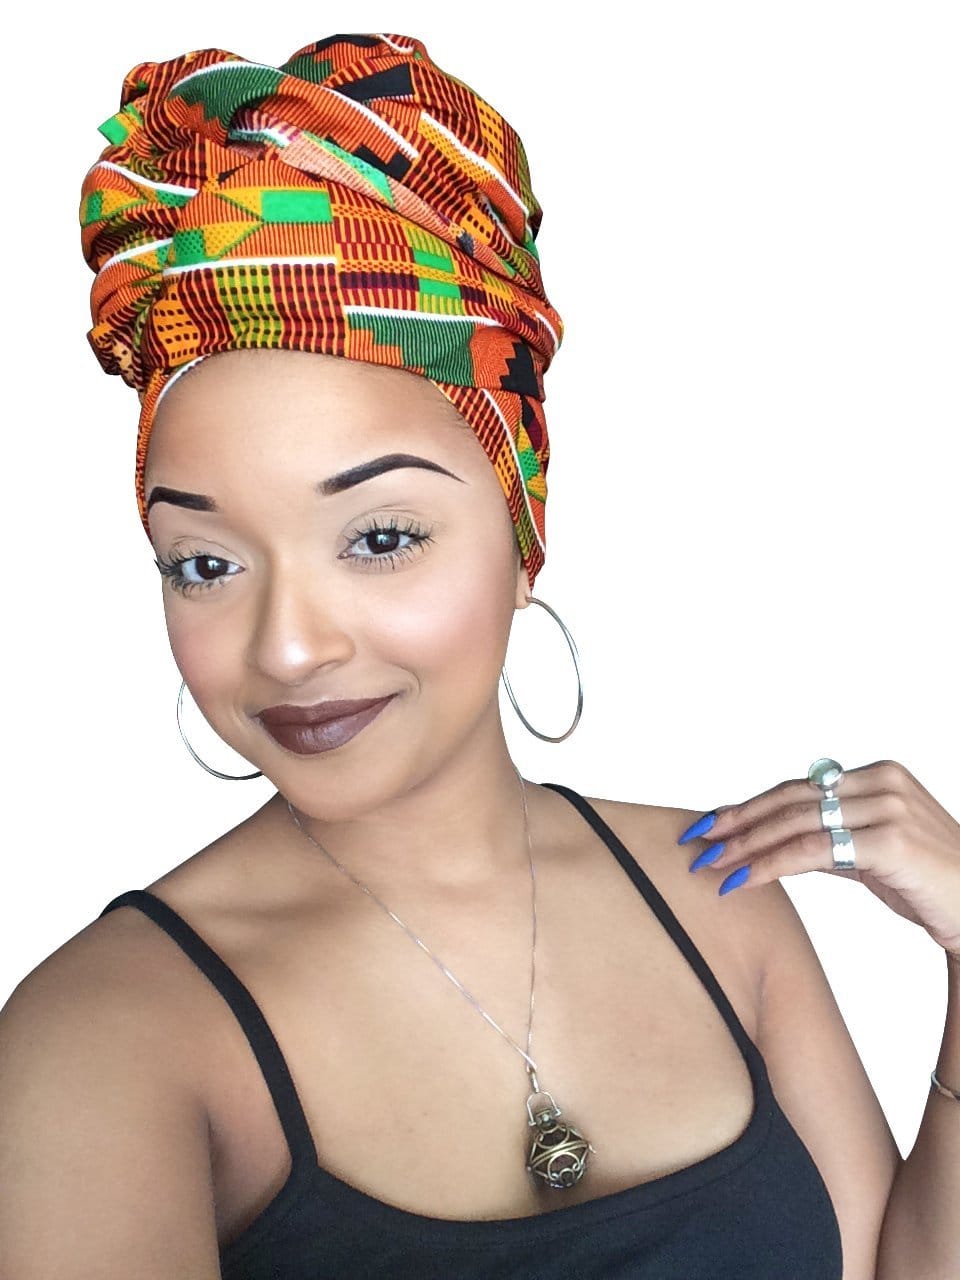 New Jersey fashion blogger rounds up for top African head wraps with details on where you can get these one-of-a-kind ankara headscarves. Keep reading to get the scoop. All your favorite styles in one place (+find out where to get them). Click to see all! #africanfashionoutfits #kente #headscarf